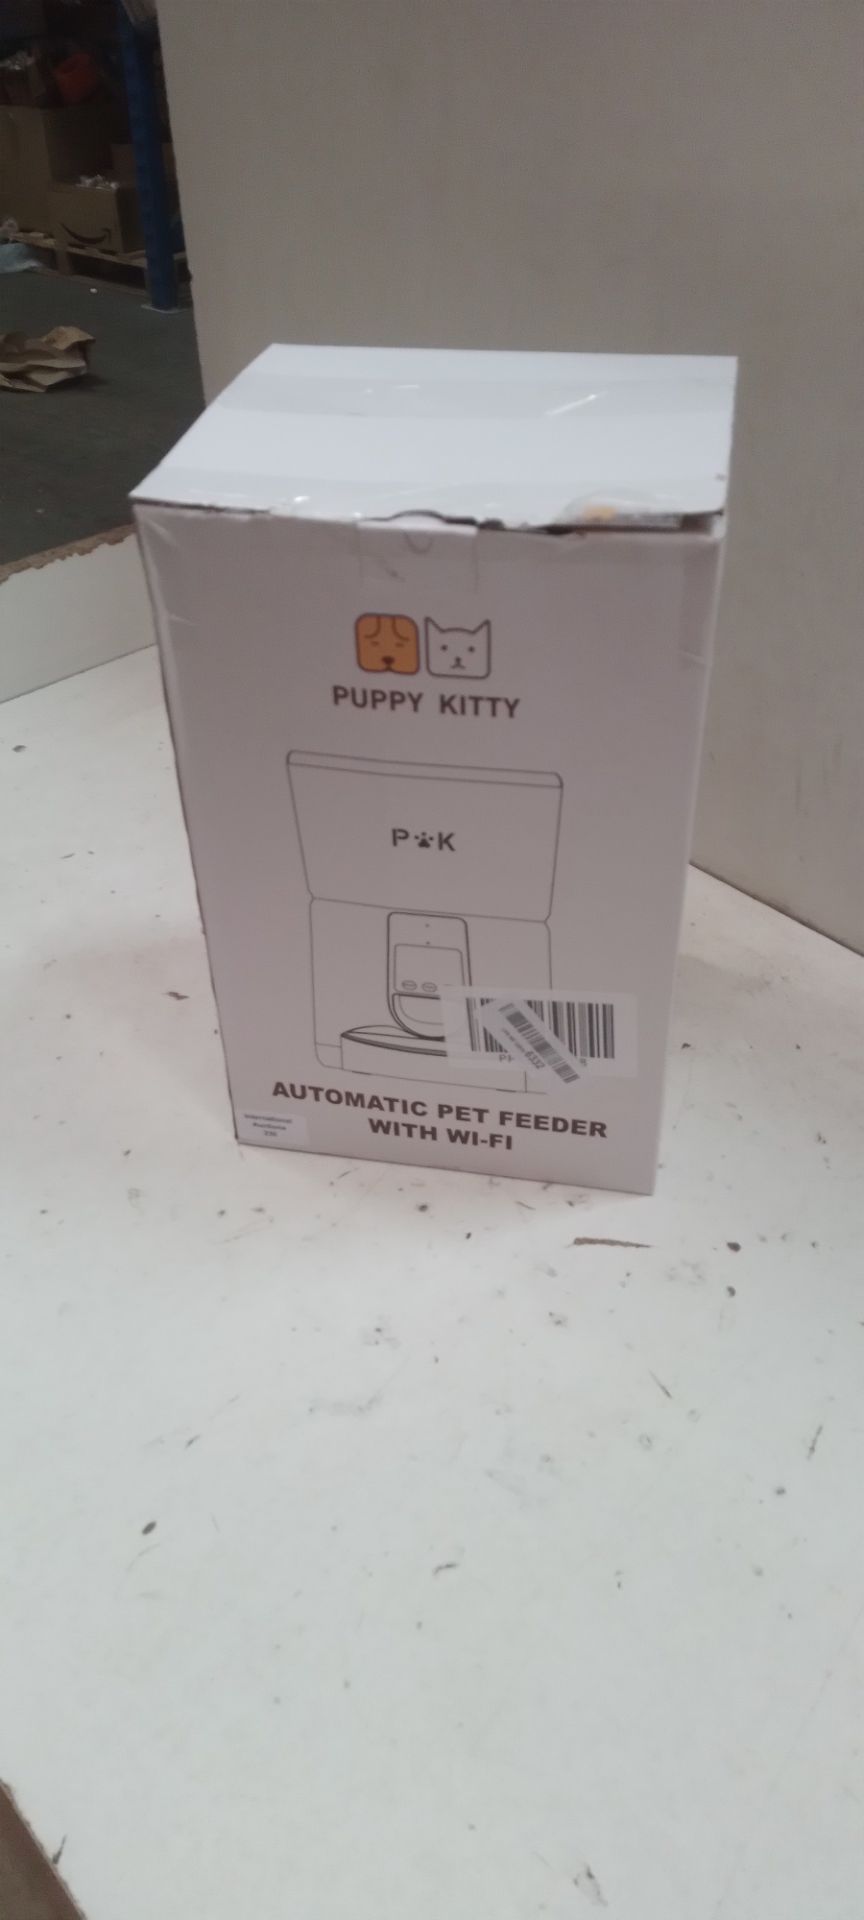 RRP £58.53 PUPPY KITTY Automatic cat feeder - Image 2 of 2